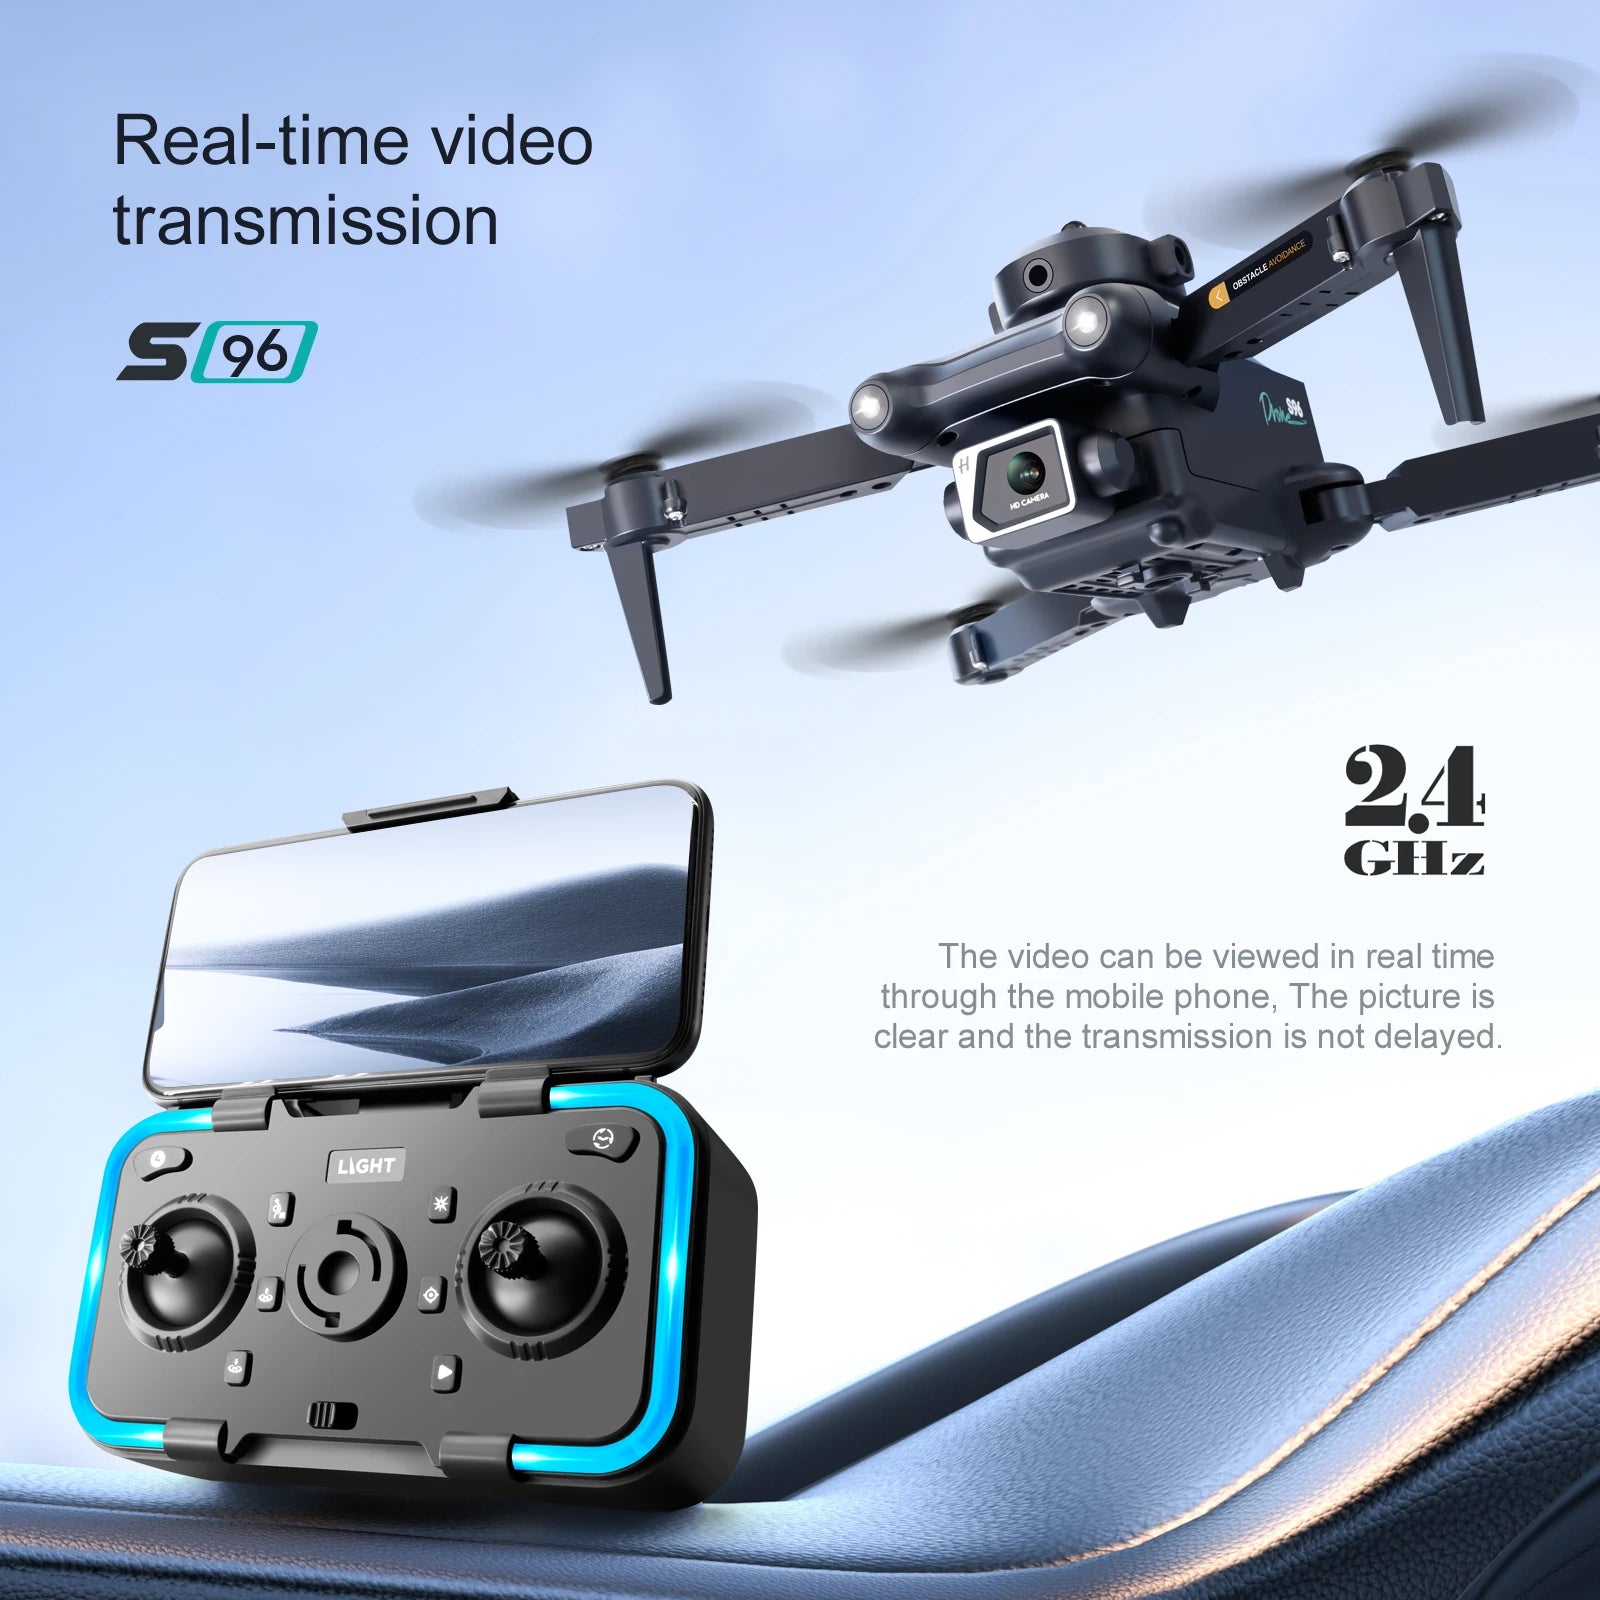 S96 Mini Drone, real-time video transmission 5l96 24 ghz the